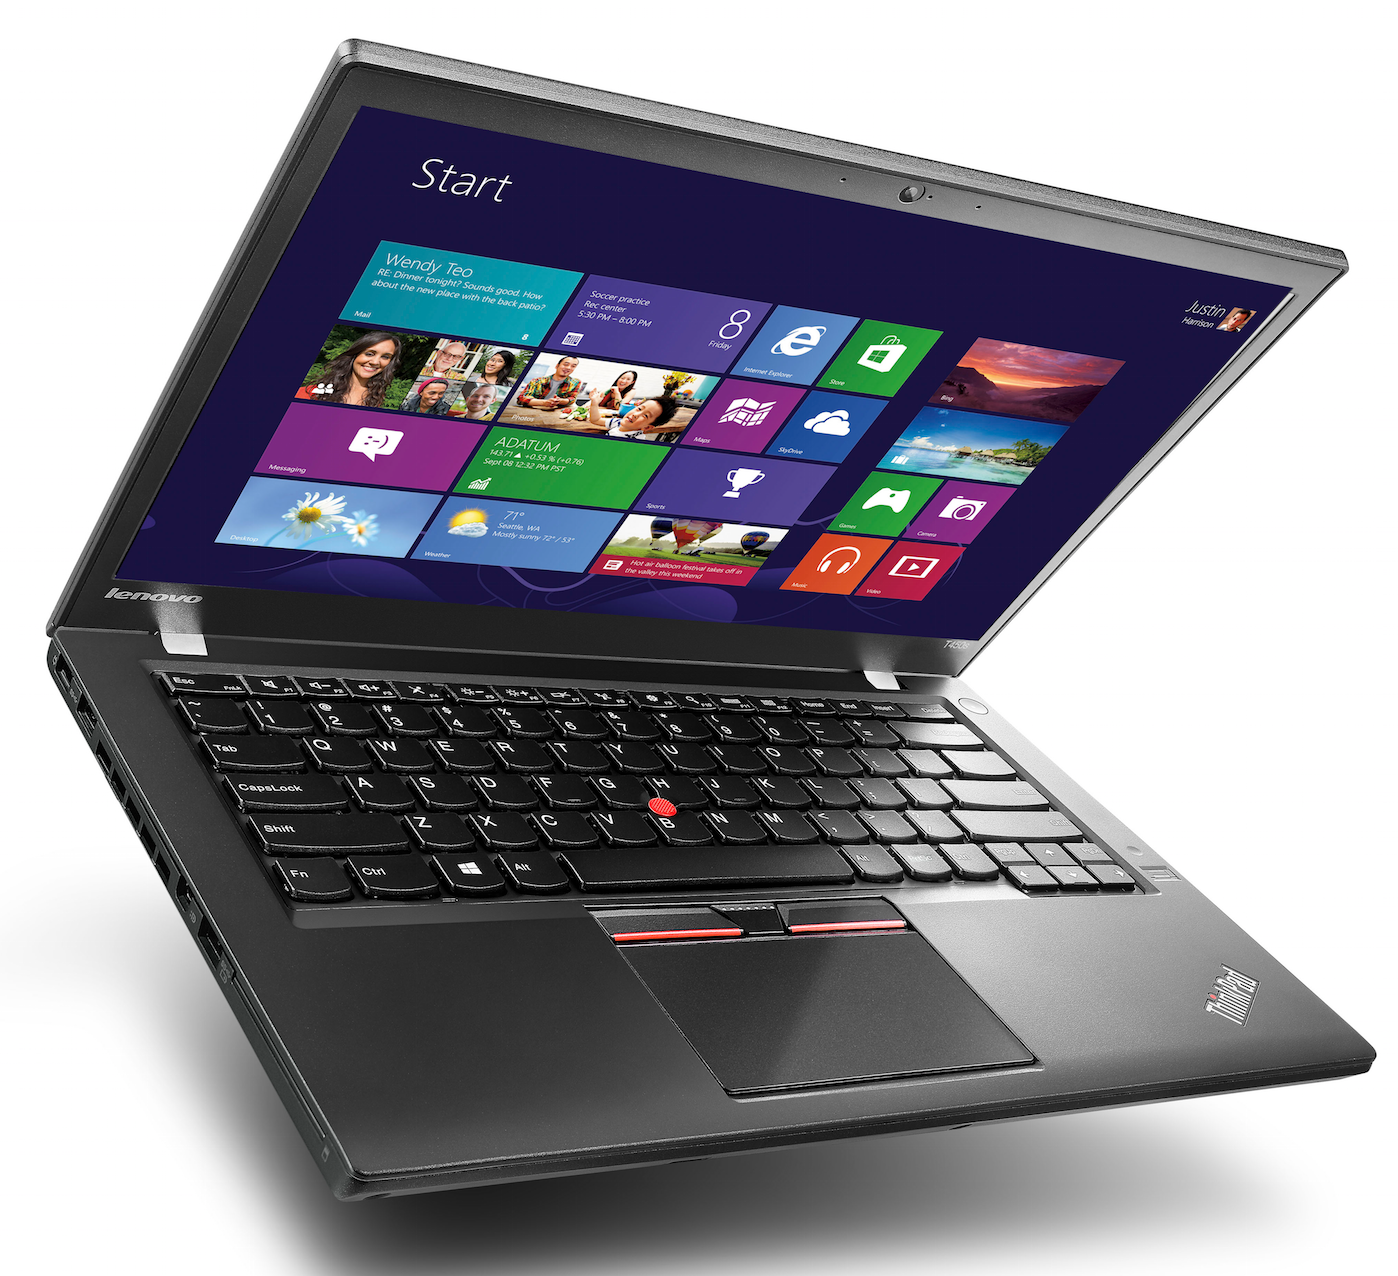 lenovo shows off 14 inch thinkpad x1 carbon alongside new touchscreen ultrabooks and more image 5